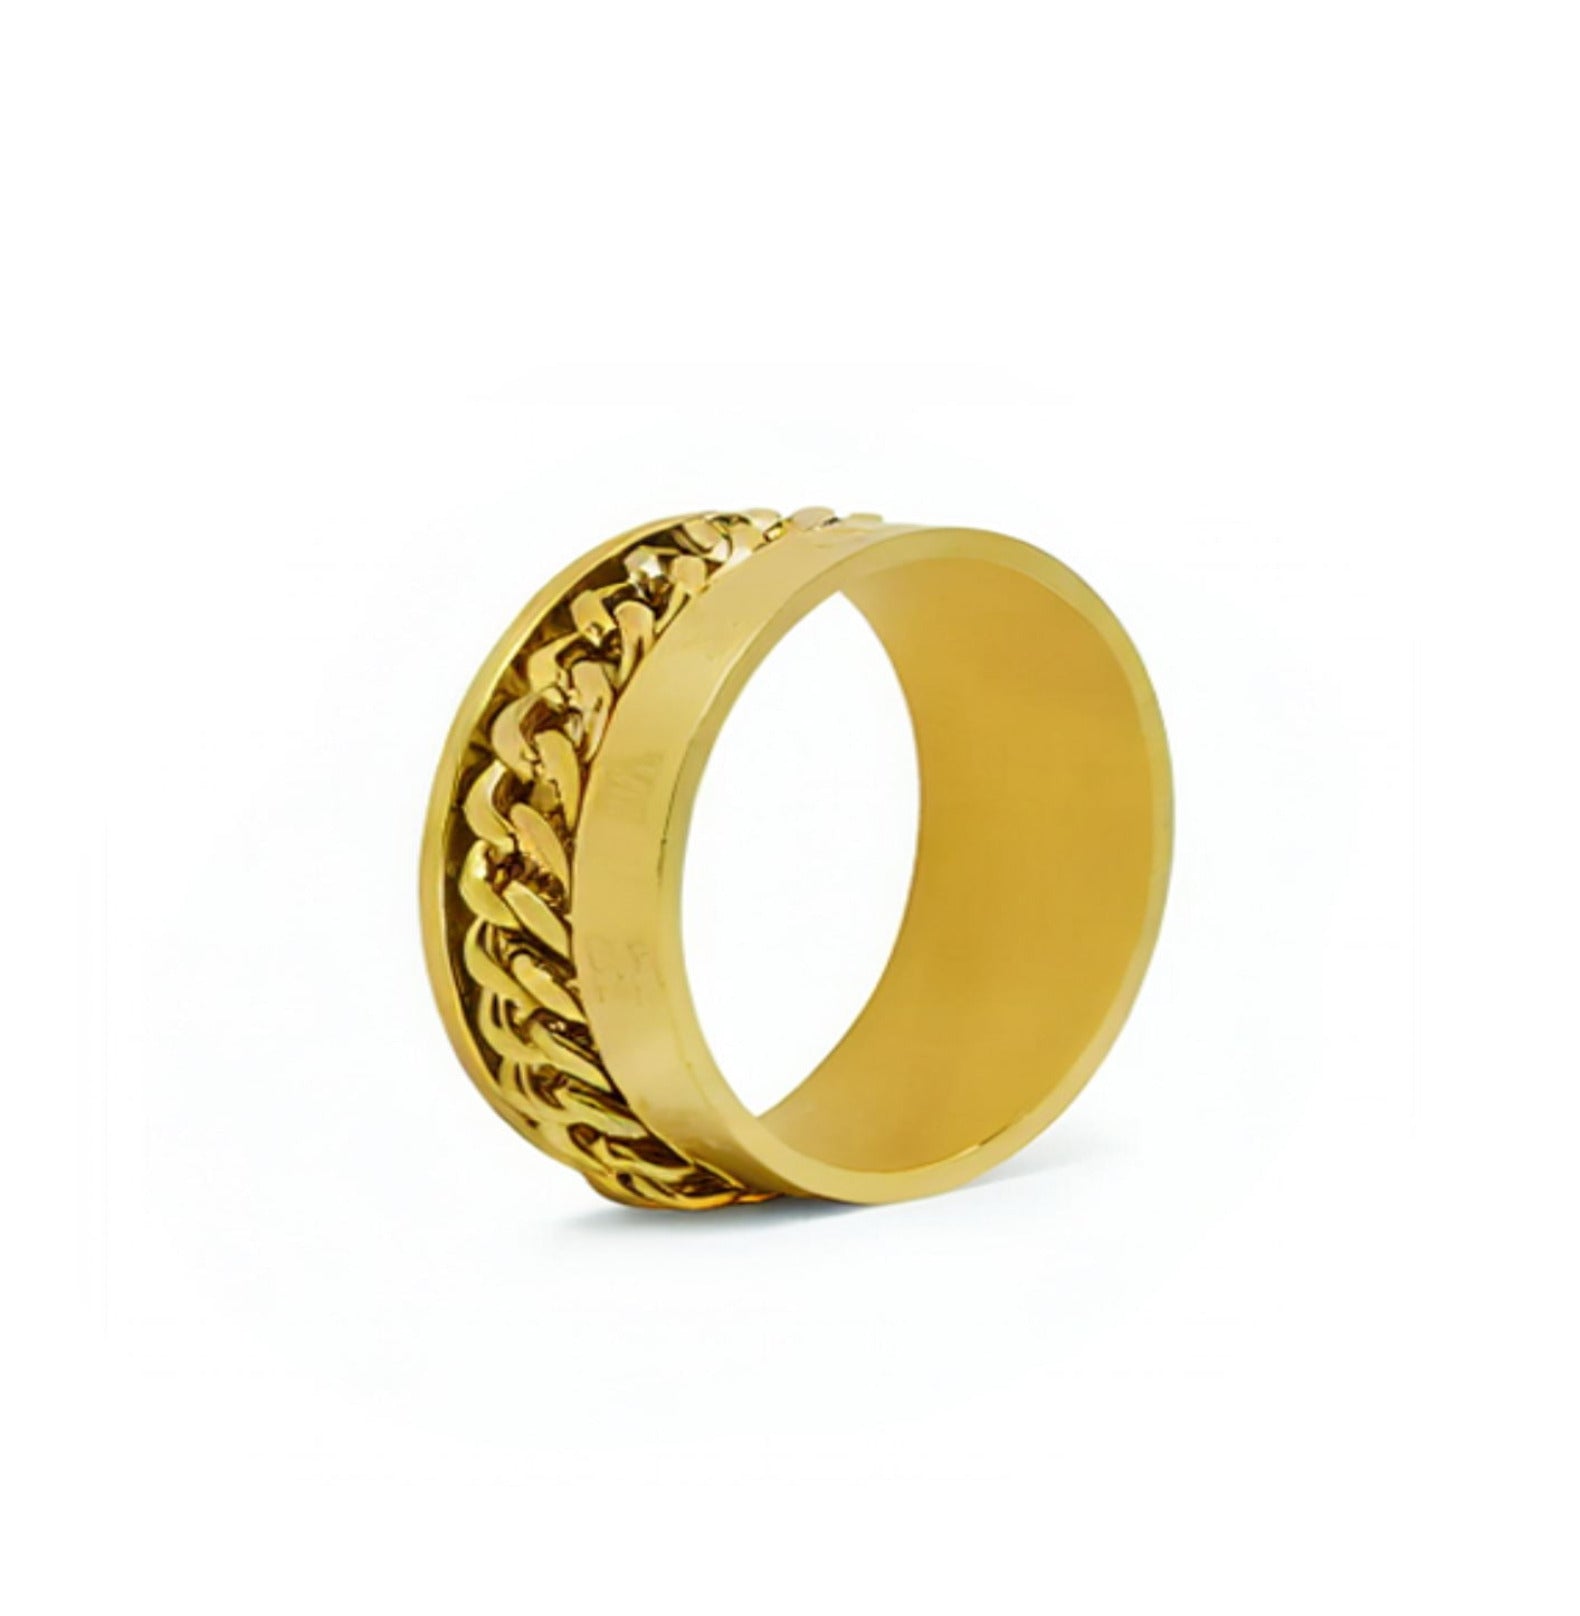 GOLD CUBAN NUMERAL RING ring Yubama Jewelry Online Store - The Elegant Designs of Gold and Silver ! Gold 10 